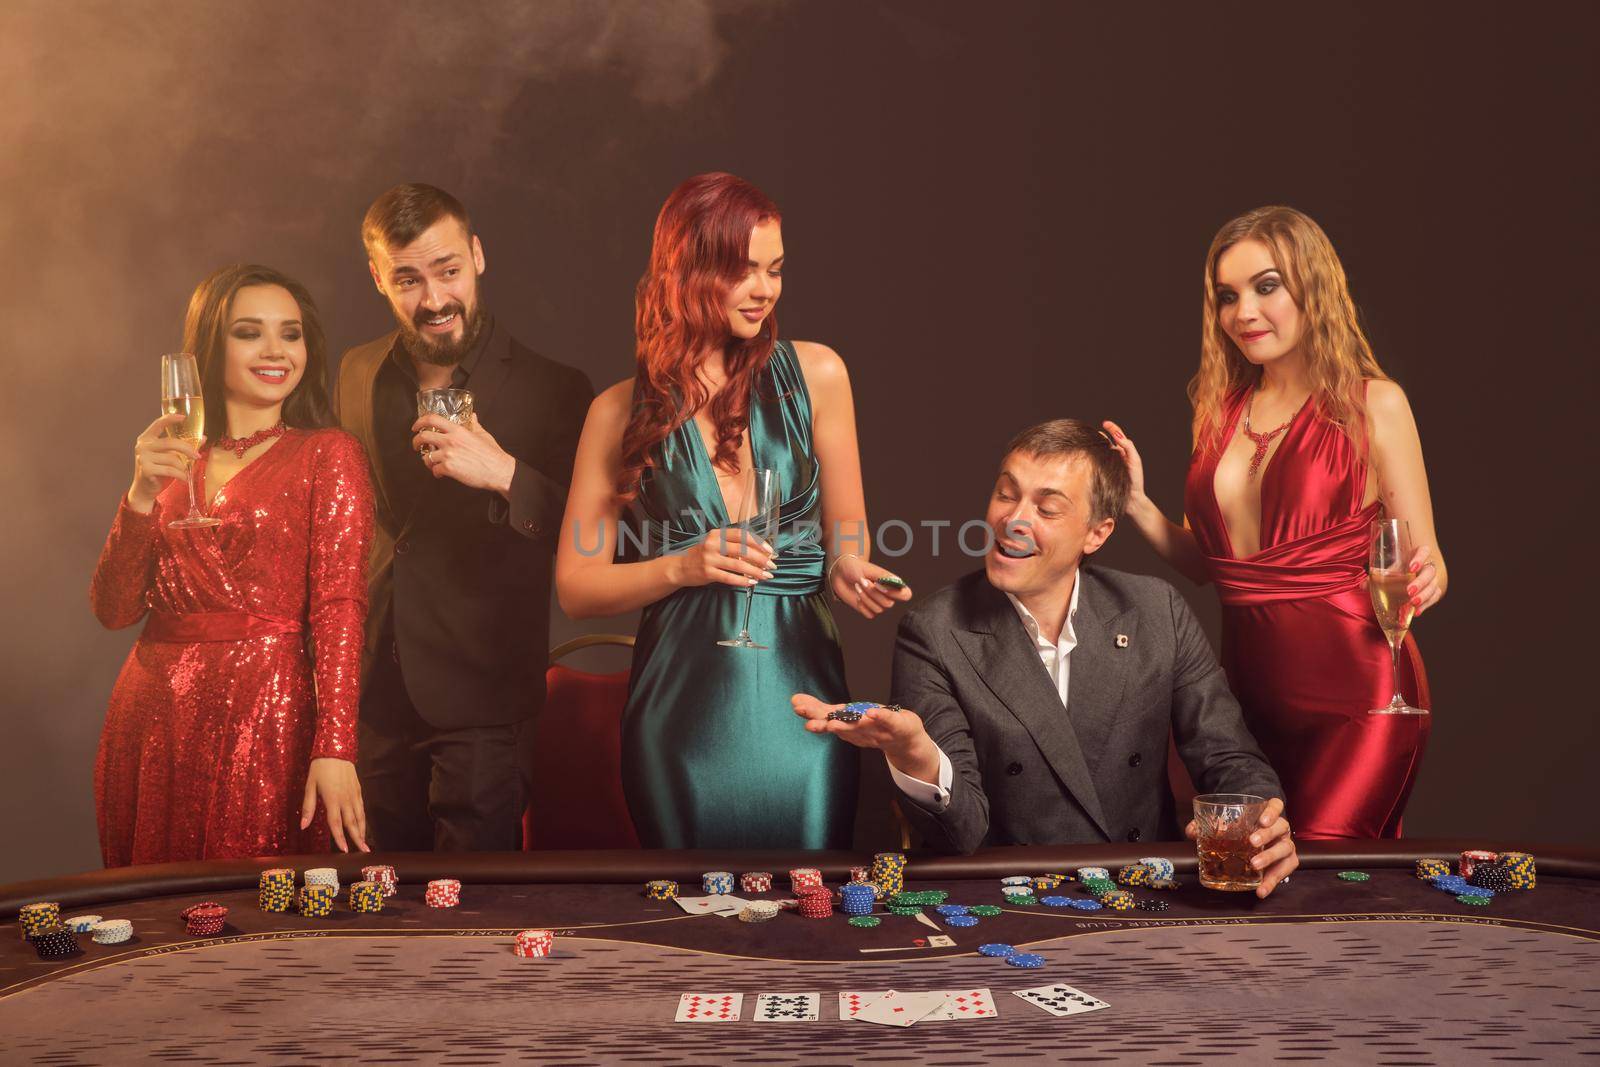 Happy classmates are playing poker at casino. They are celebrating their win, smiling and looking vey excited while posing at the table against a dark smoke background in a ray of a spotlight. Cards, chips, money, alcohol, gambling, entertainment concept.